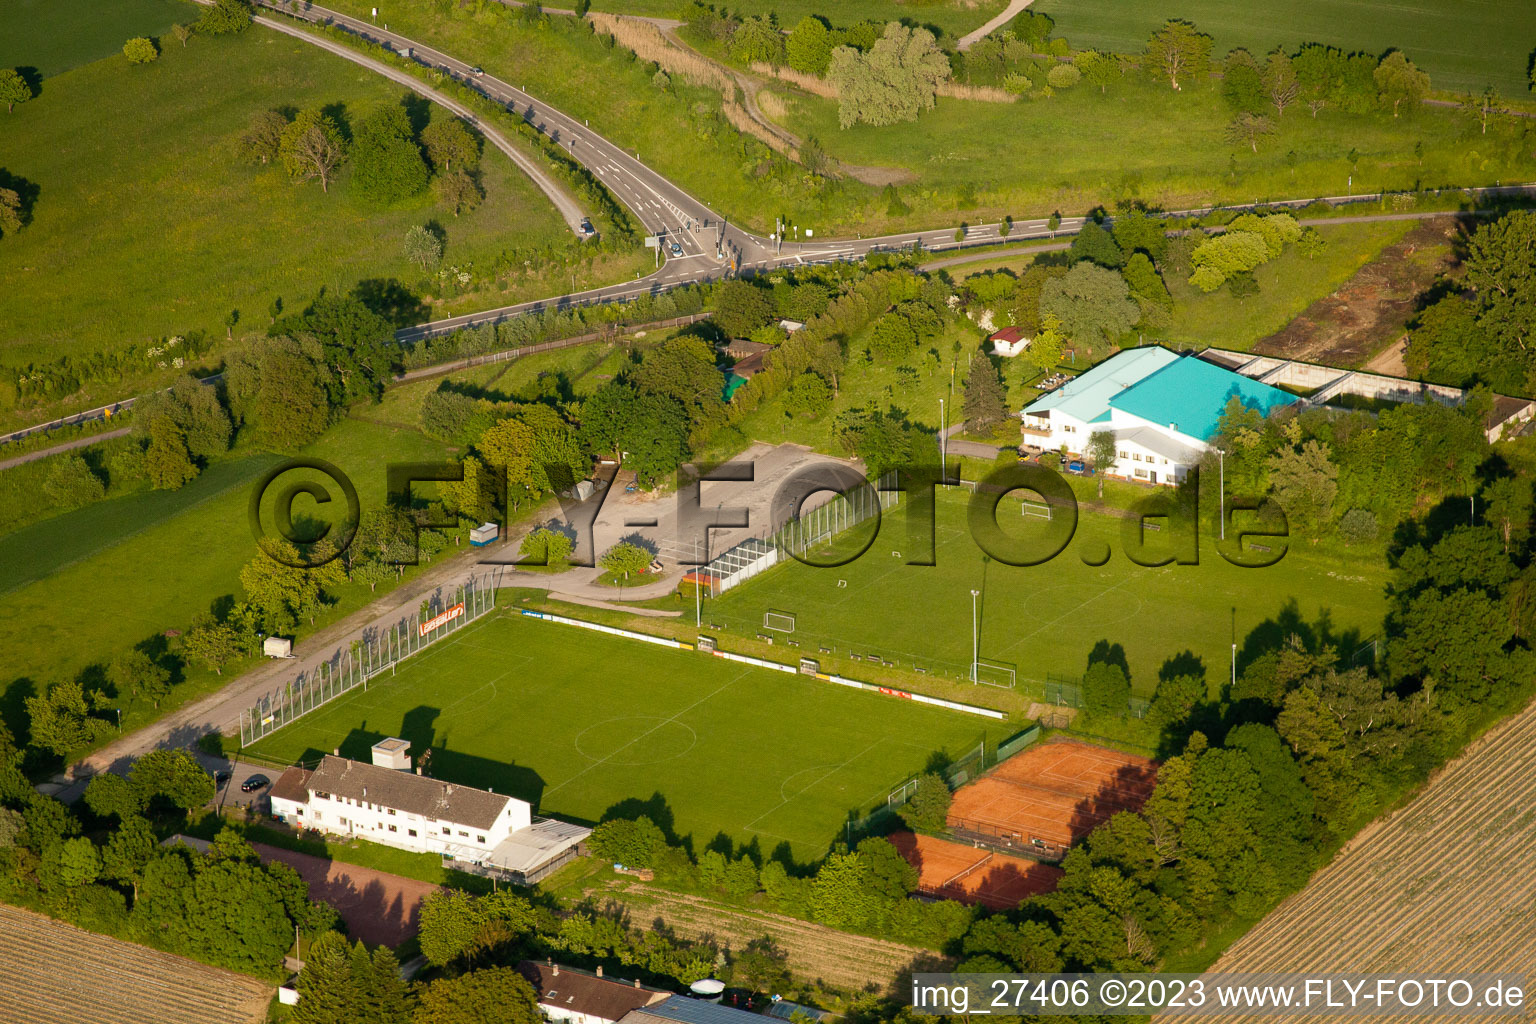 Aerial view of Sports ground in the district Wolfartsweier in Karlsruhe in the state Baden-Wuerttemberg, Germany